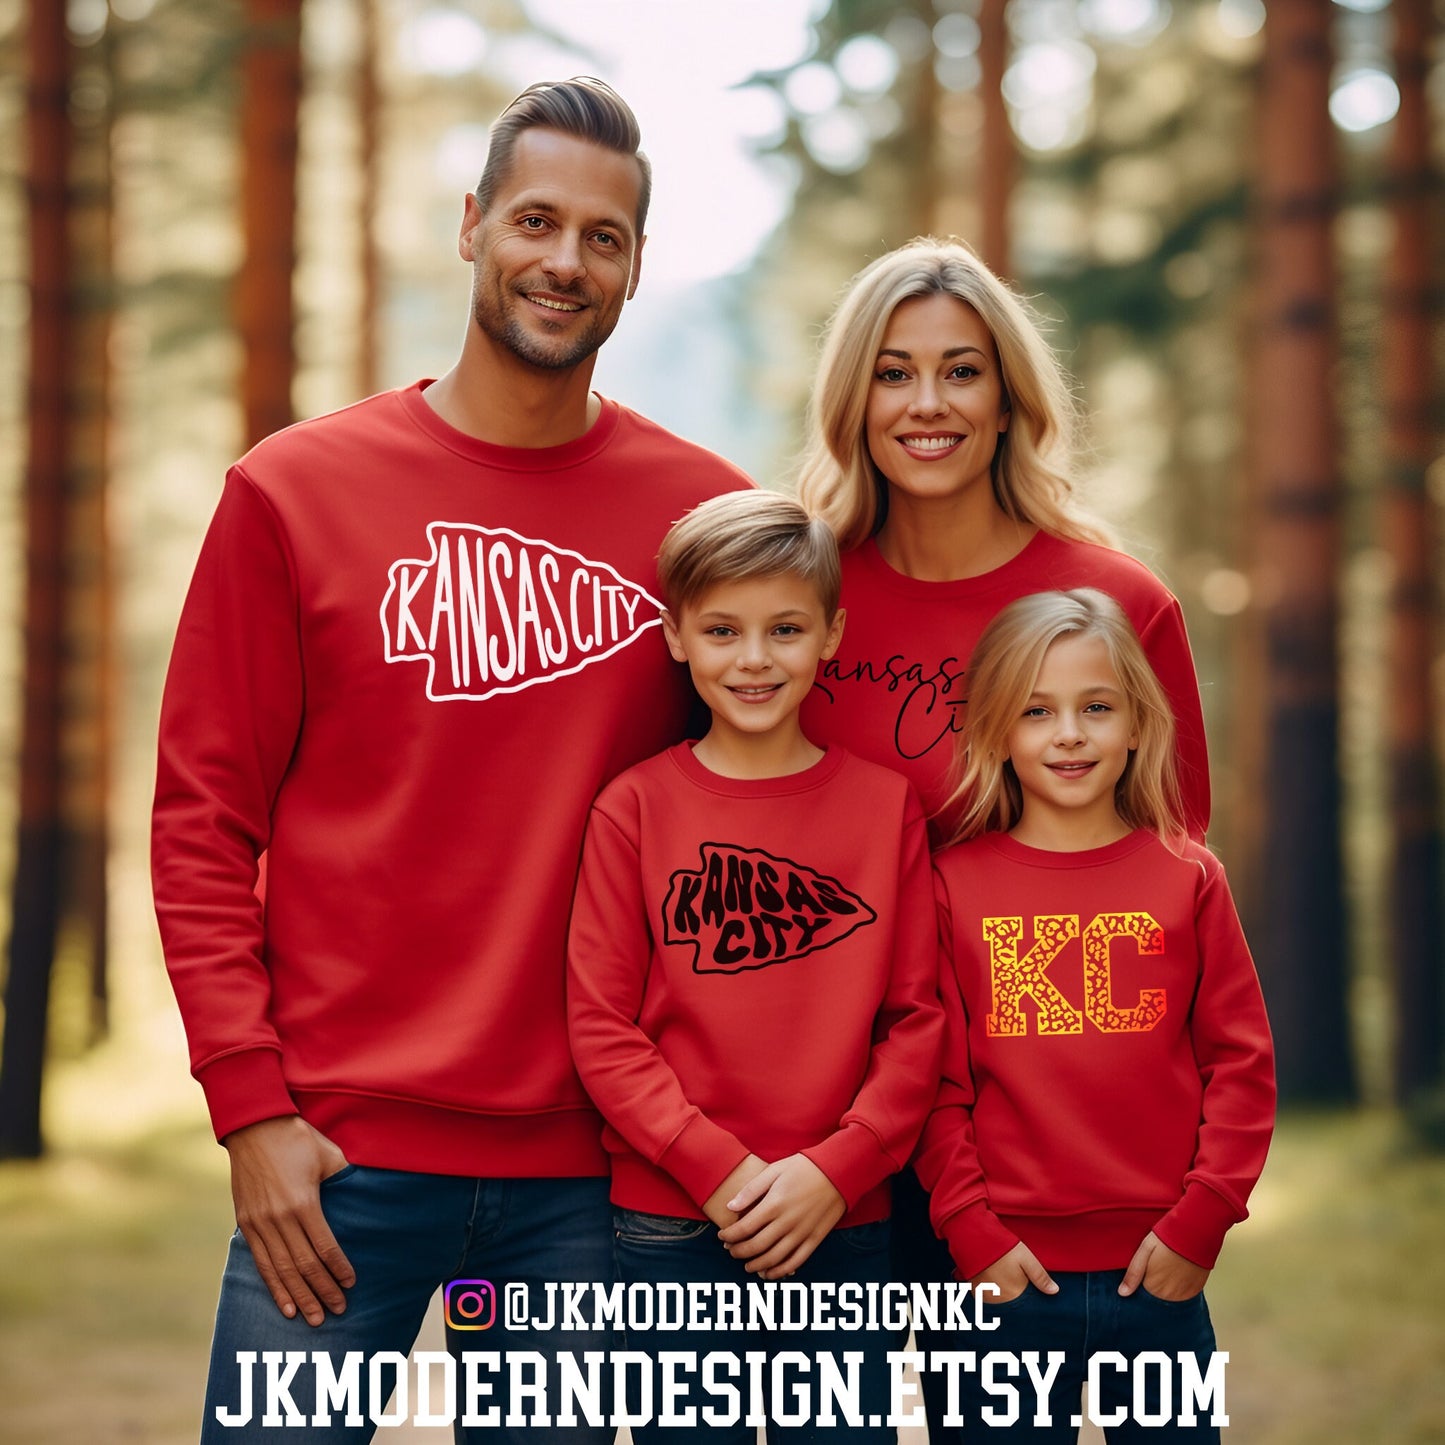 MADE In KC TDKC Kansas City Toddler Tee | Perfect for Game Day! | Super Soft! Red Black White Sweatshirt Long & Short Sleeve T-Shirt T td kc